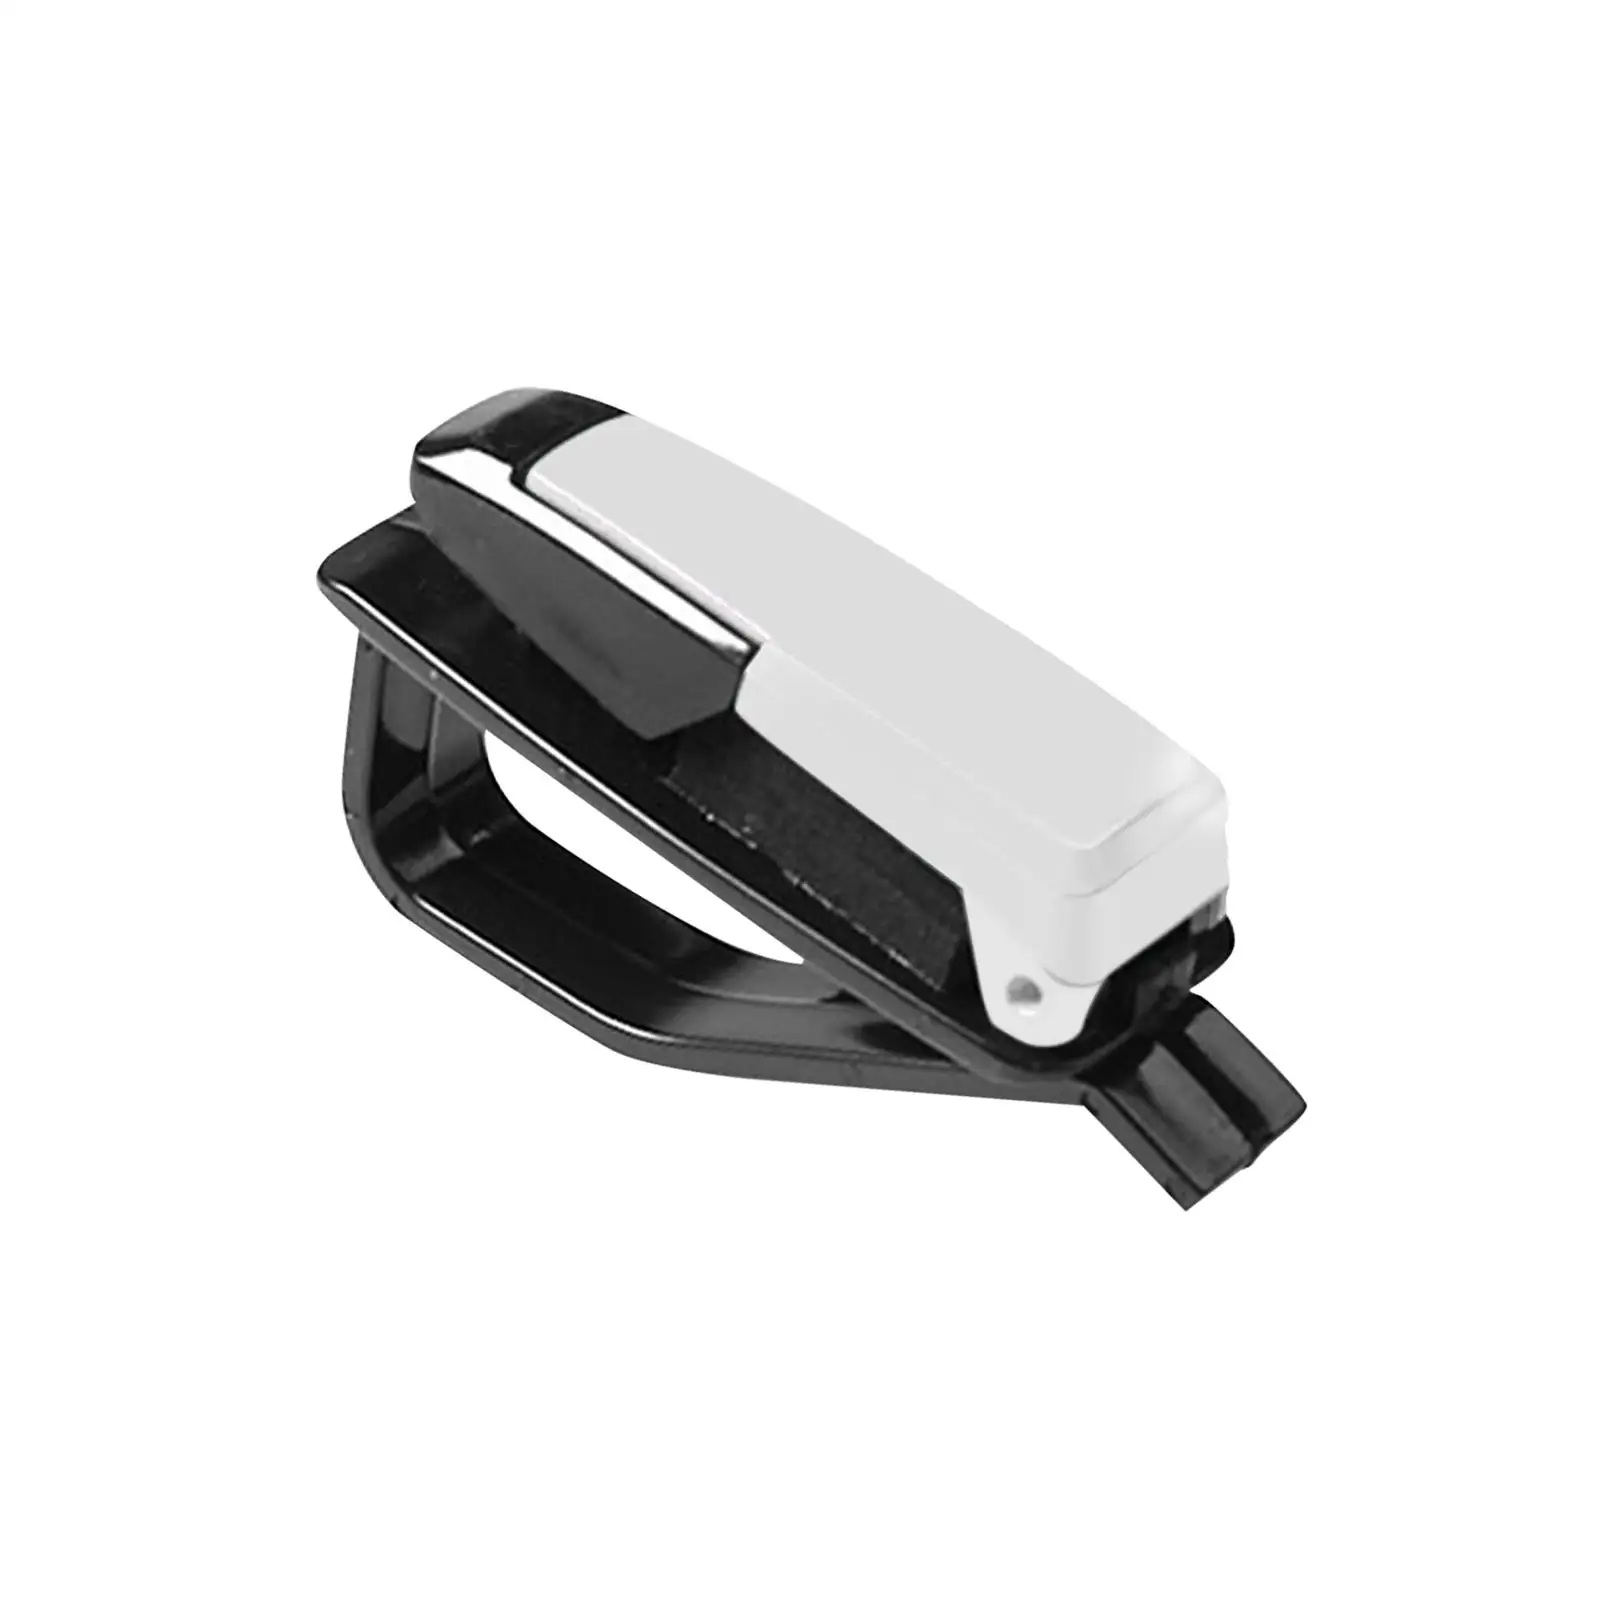 Car Sunglasses Holder Multi Function clip Firm Clip Holder Car Accessories car Glasses Holders for Ticket